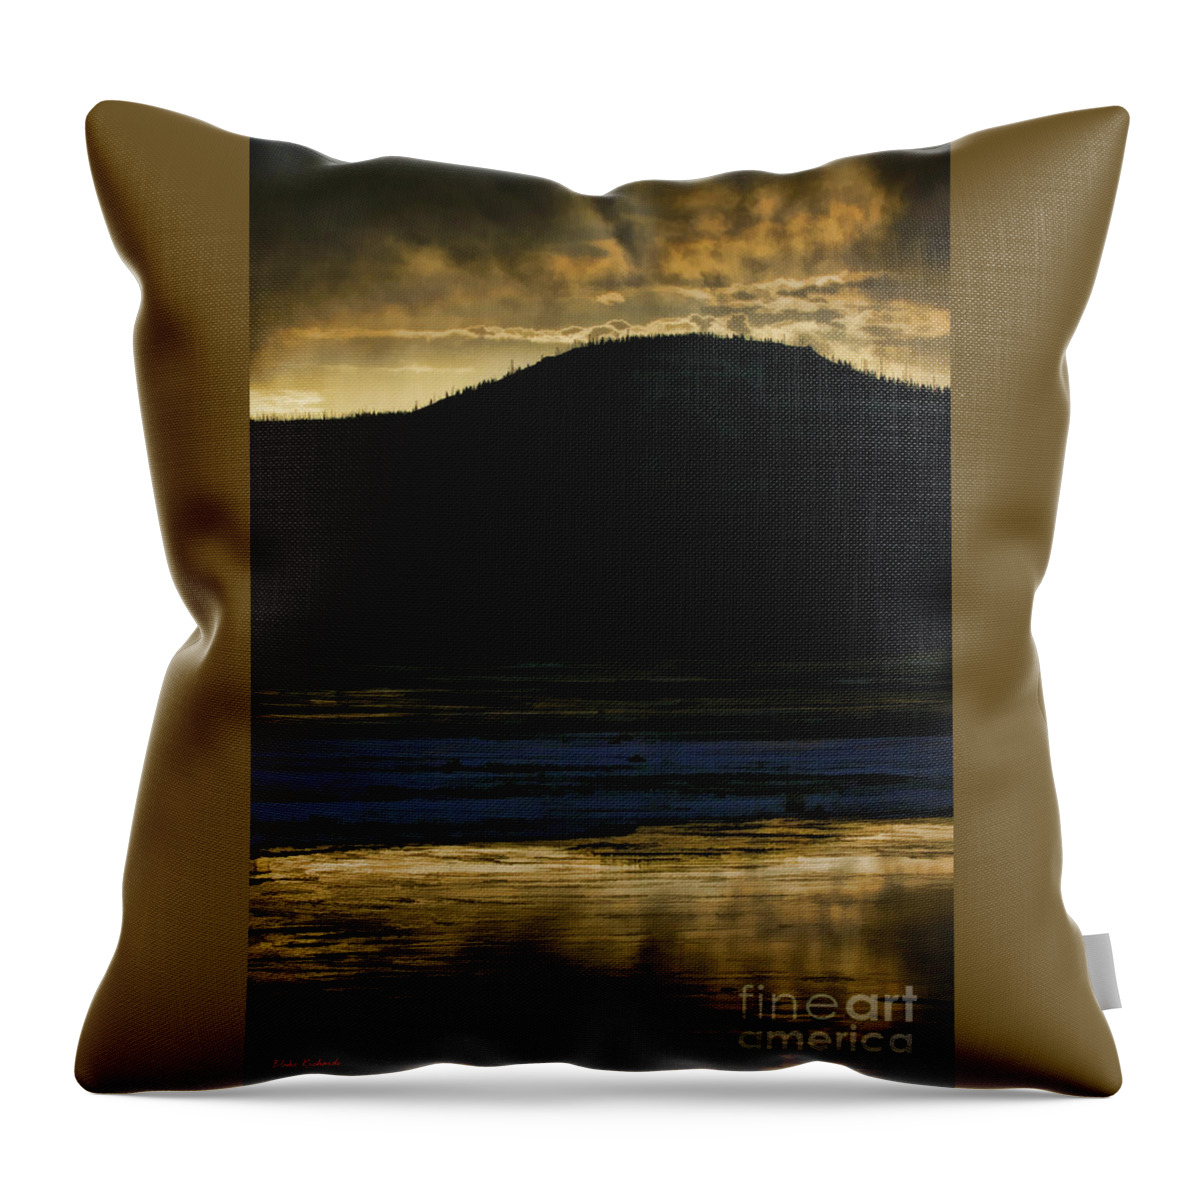 Midway Geyser Basin Throw Pillow featuring the photograph Midway Geyser Basin Mountain by Blake Richards